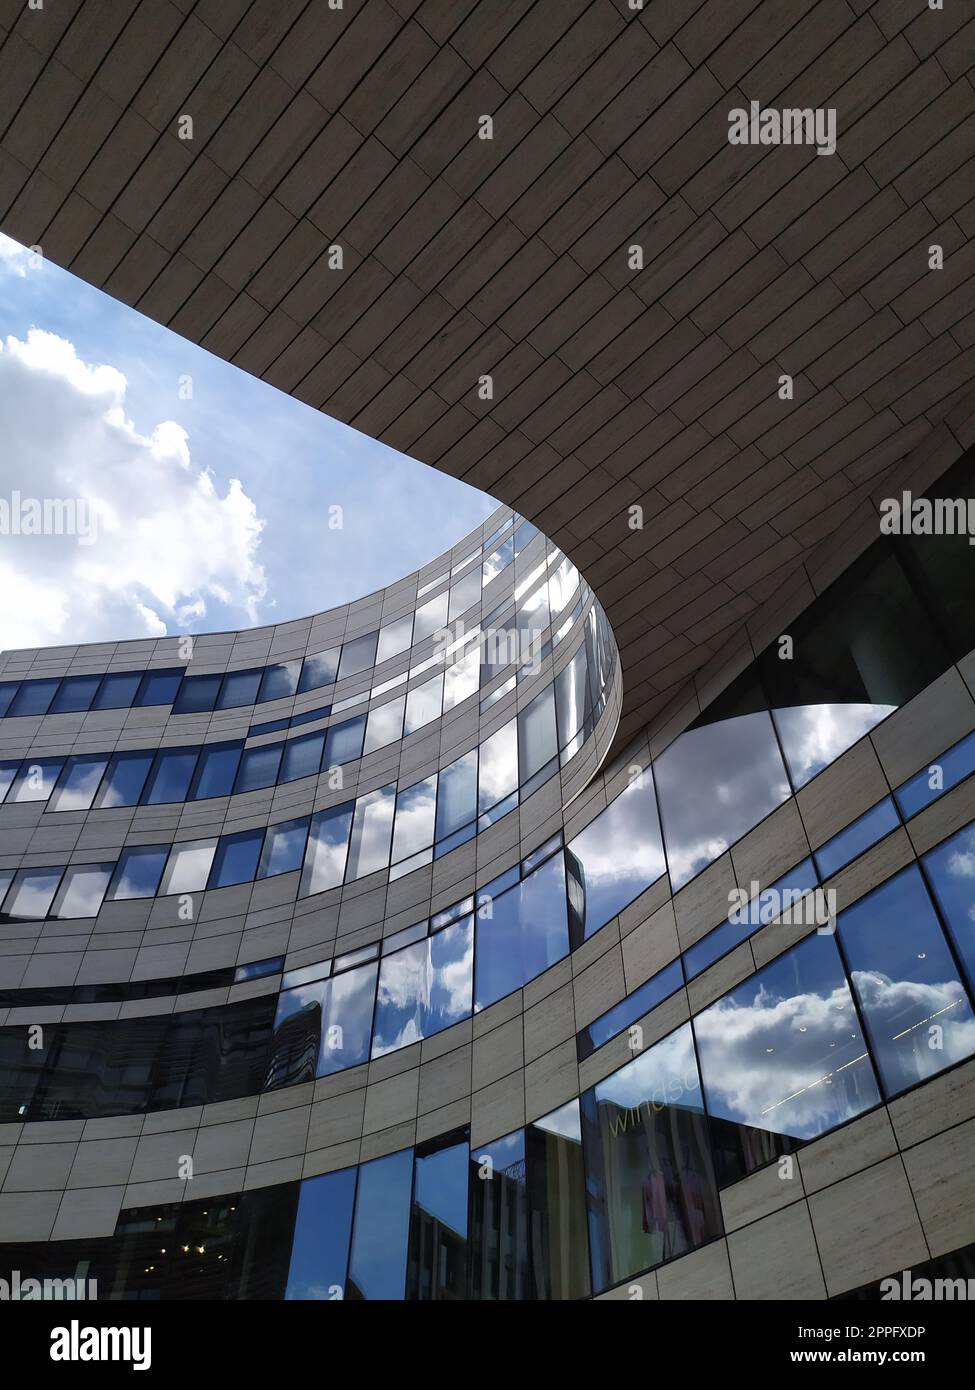 Dusseldorf, Germany - July 16th, 2022: Modern architecture of the DÃ¼sseldorfer KÃ¶bogen in summer shows attractive and extravagant glass facade of organic and curvy shopping mall with blue sky clouds Stock Photo